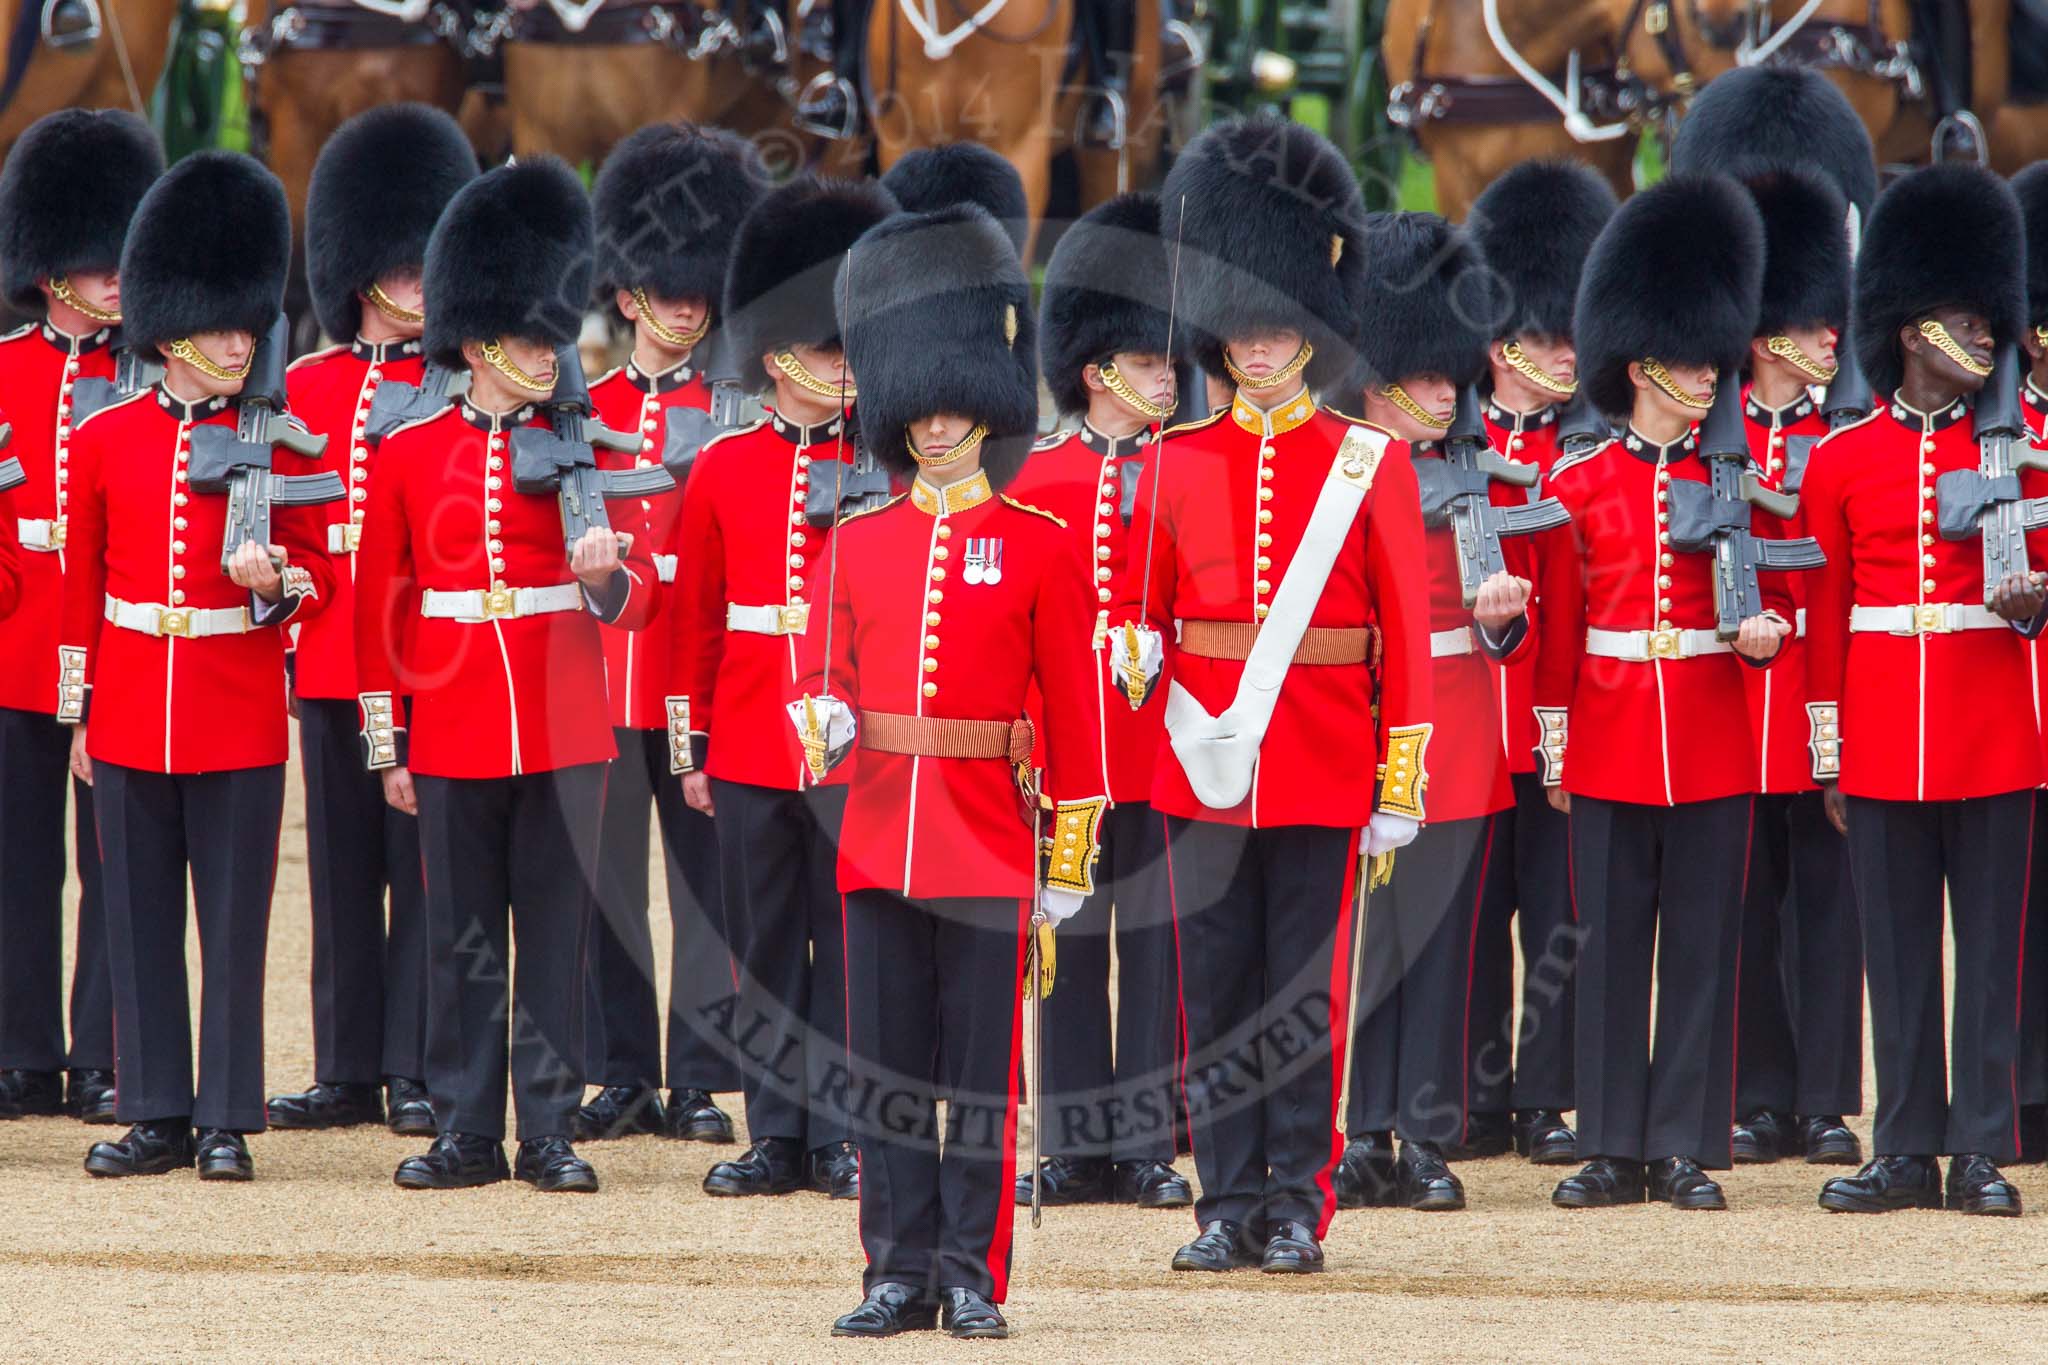 Trooping the Colour 2014.
Horse Guards Parade, Westminster,
London SW1A,

United Kingdom,
on 14 June 2014 at 11:17, image #500